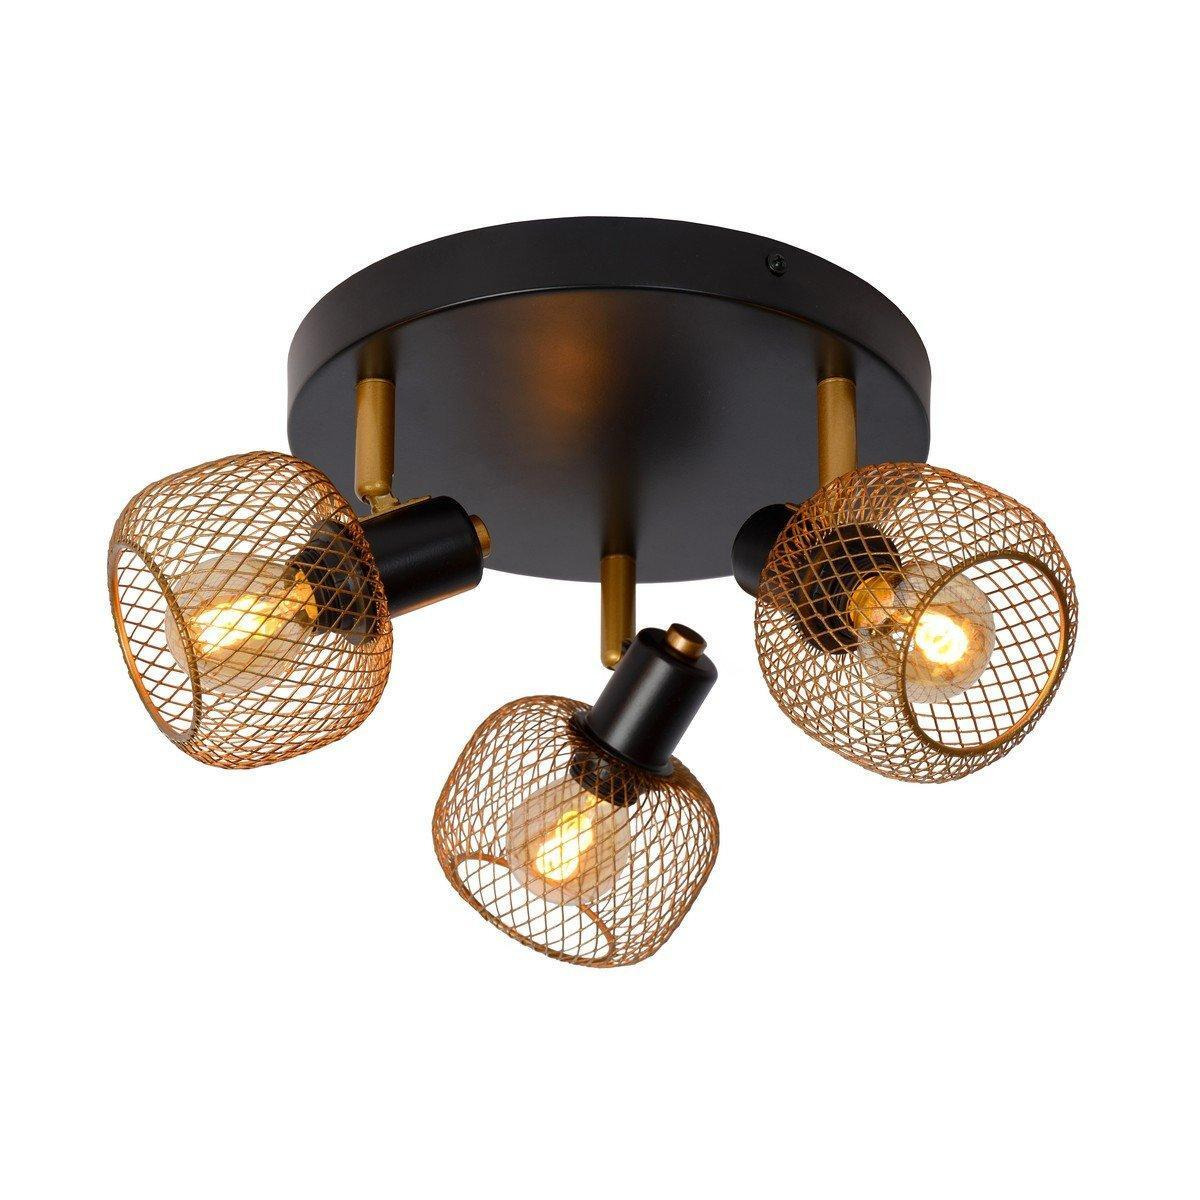 'MAREN' Dimmable Rotatable Stylish Retro Ceiling Spotlight 3xE14 - image 1